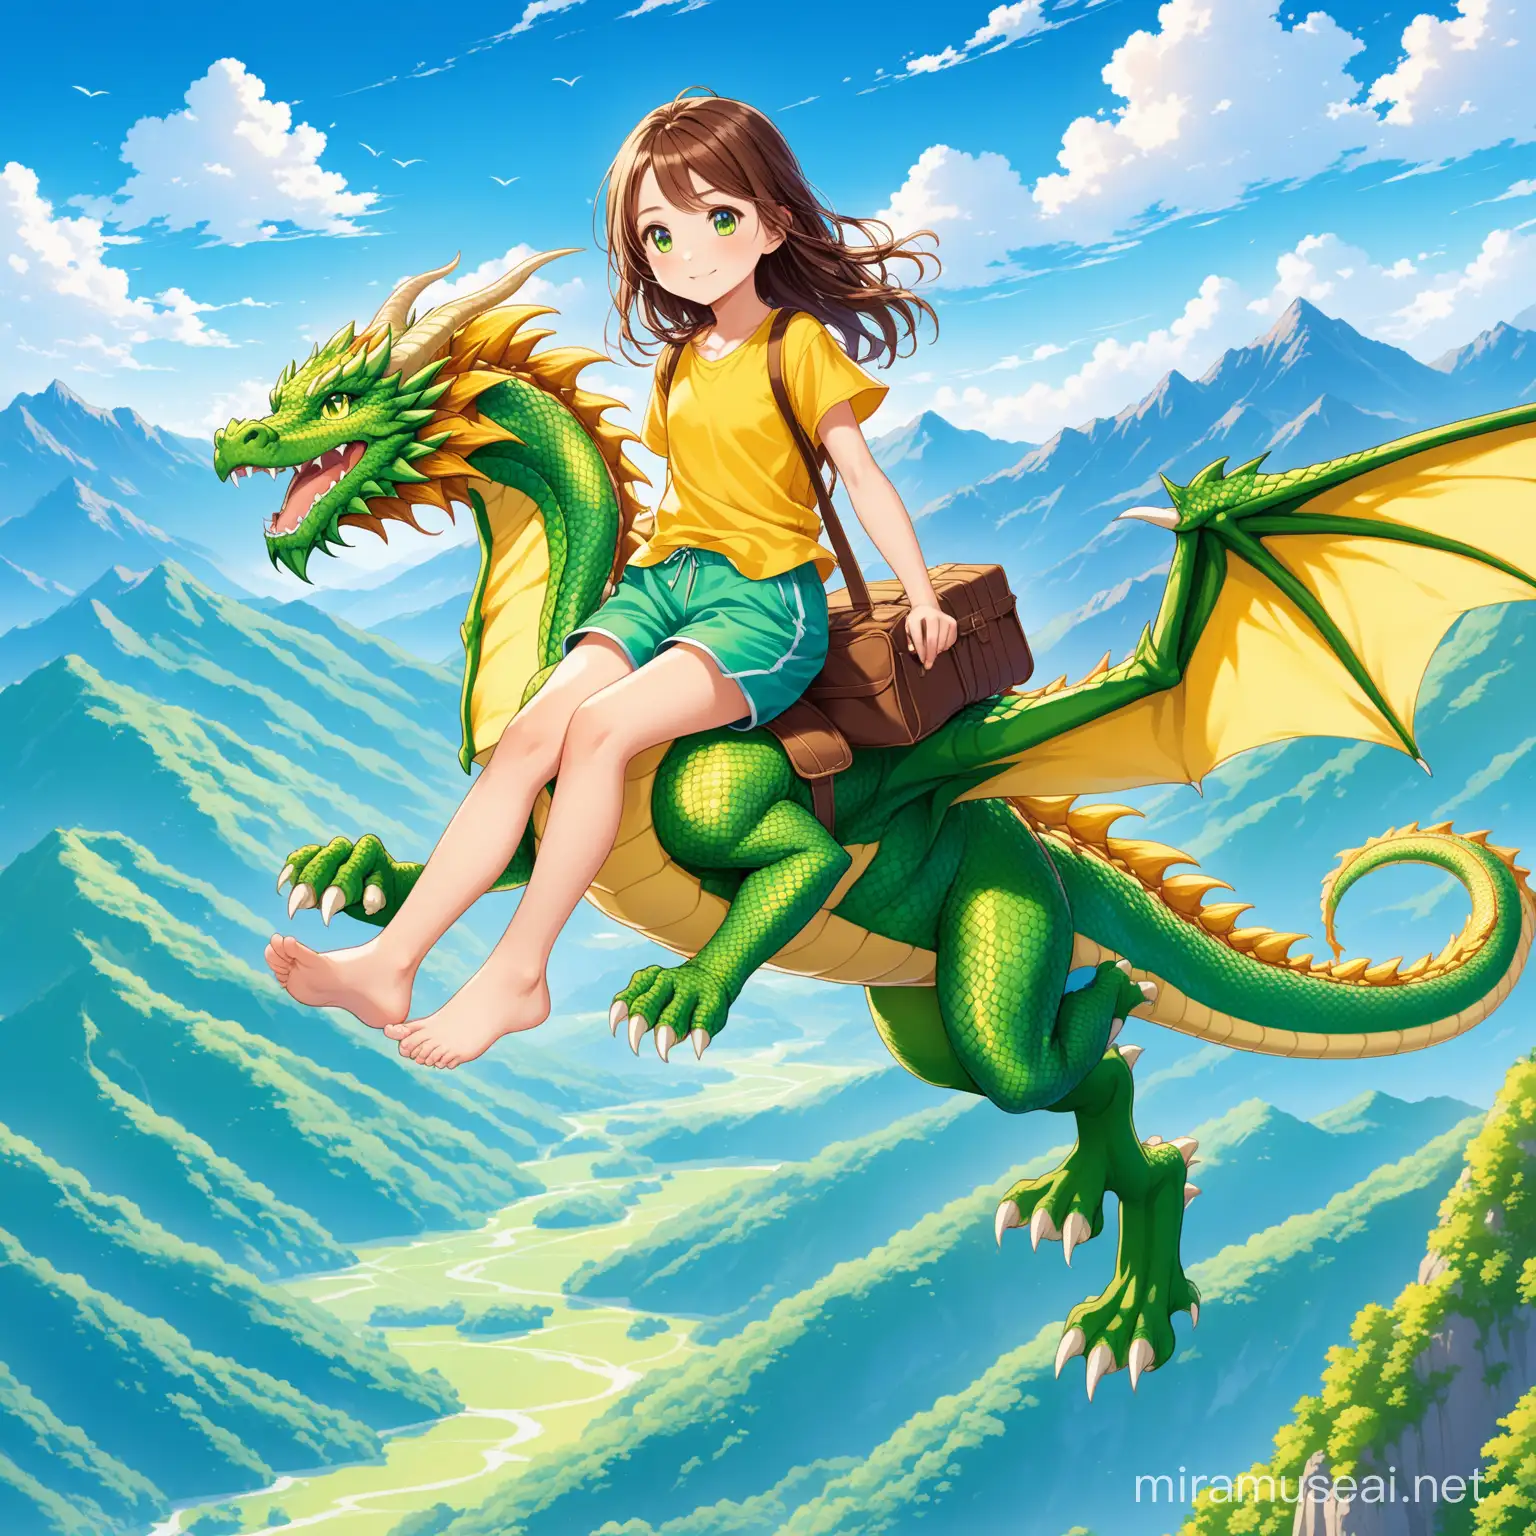 11 year old girl, long wavy brown hair, riding a blue and yellow and white beautiful dragon, flying over the mountains, yellow shirt, green baggy shorts, summer day, bare foot, green eyes, 